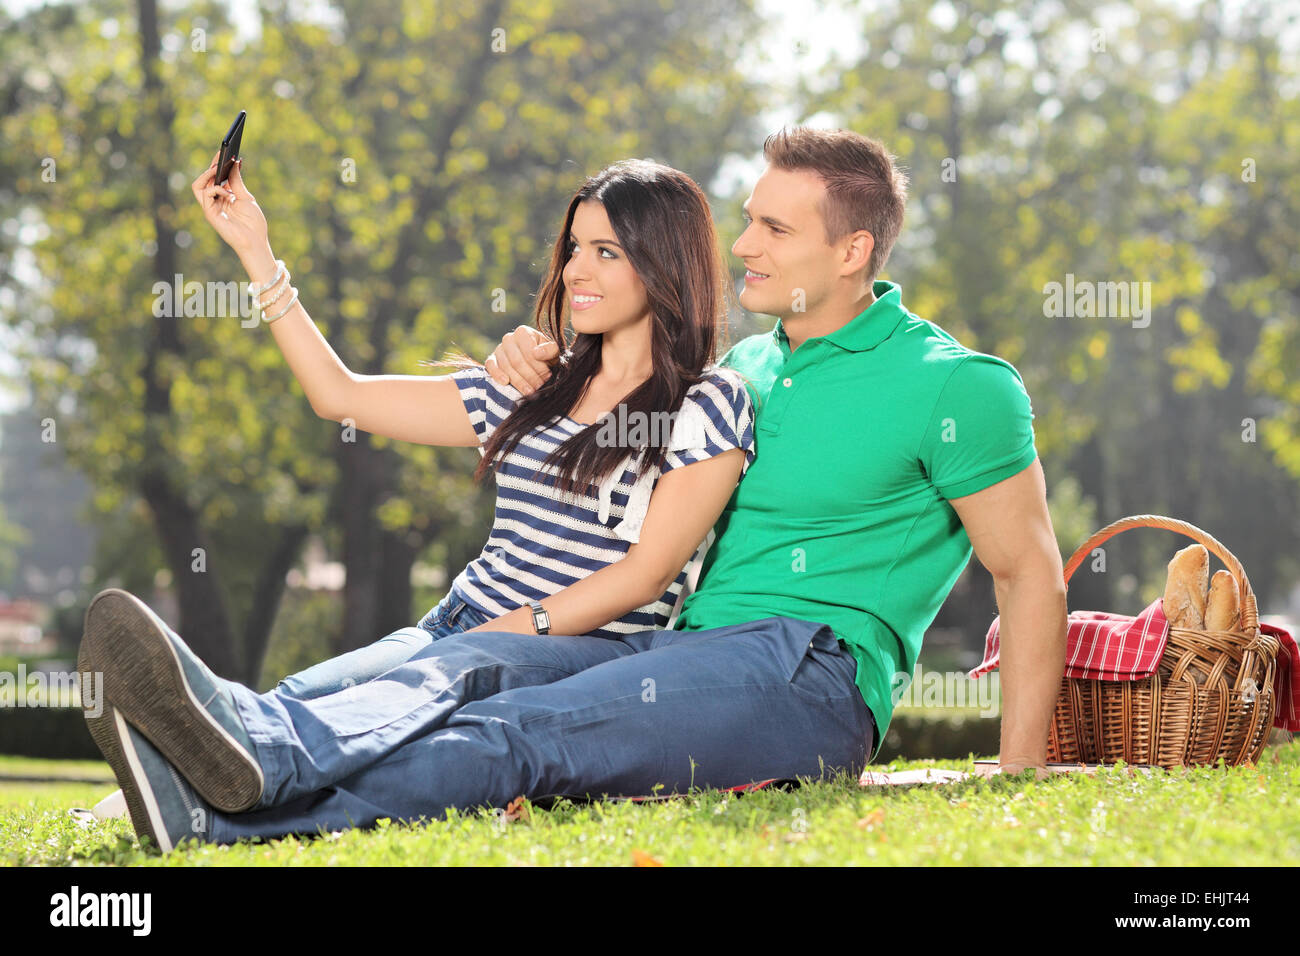 Girl taking a selfie with her boyfriend in a park Stock Photo